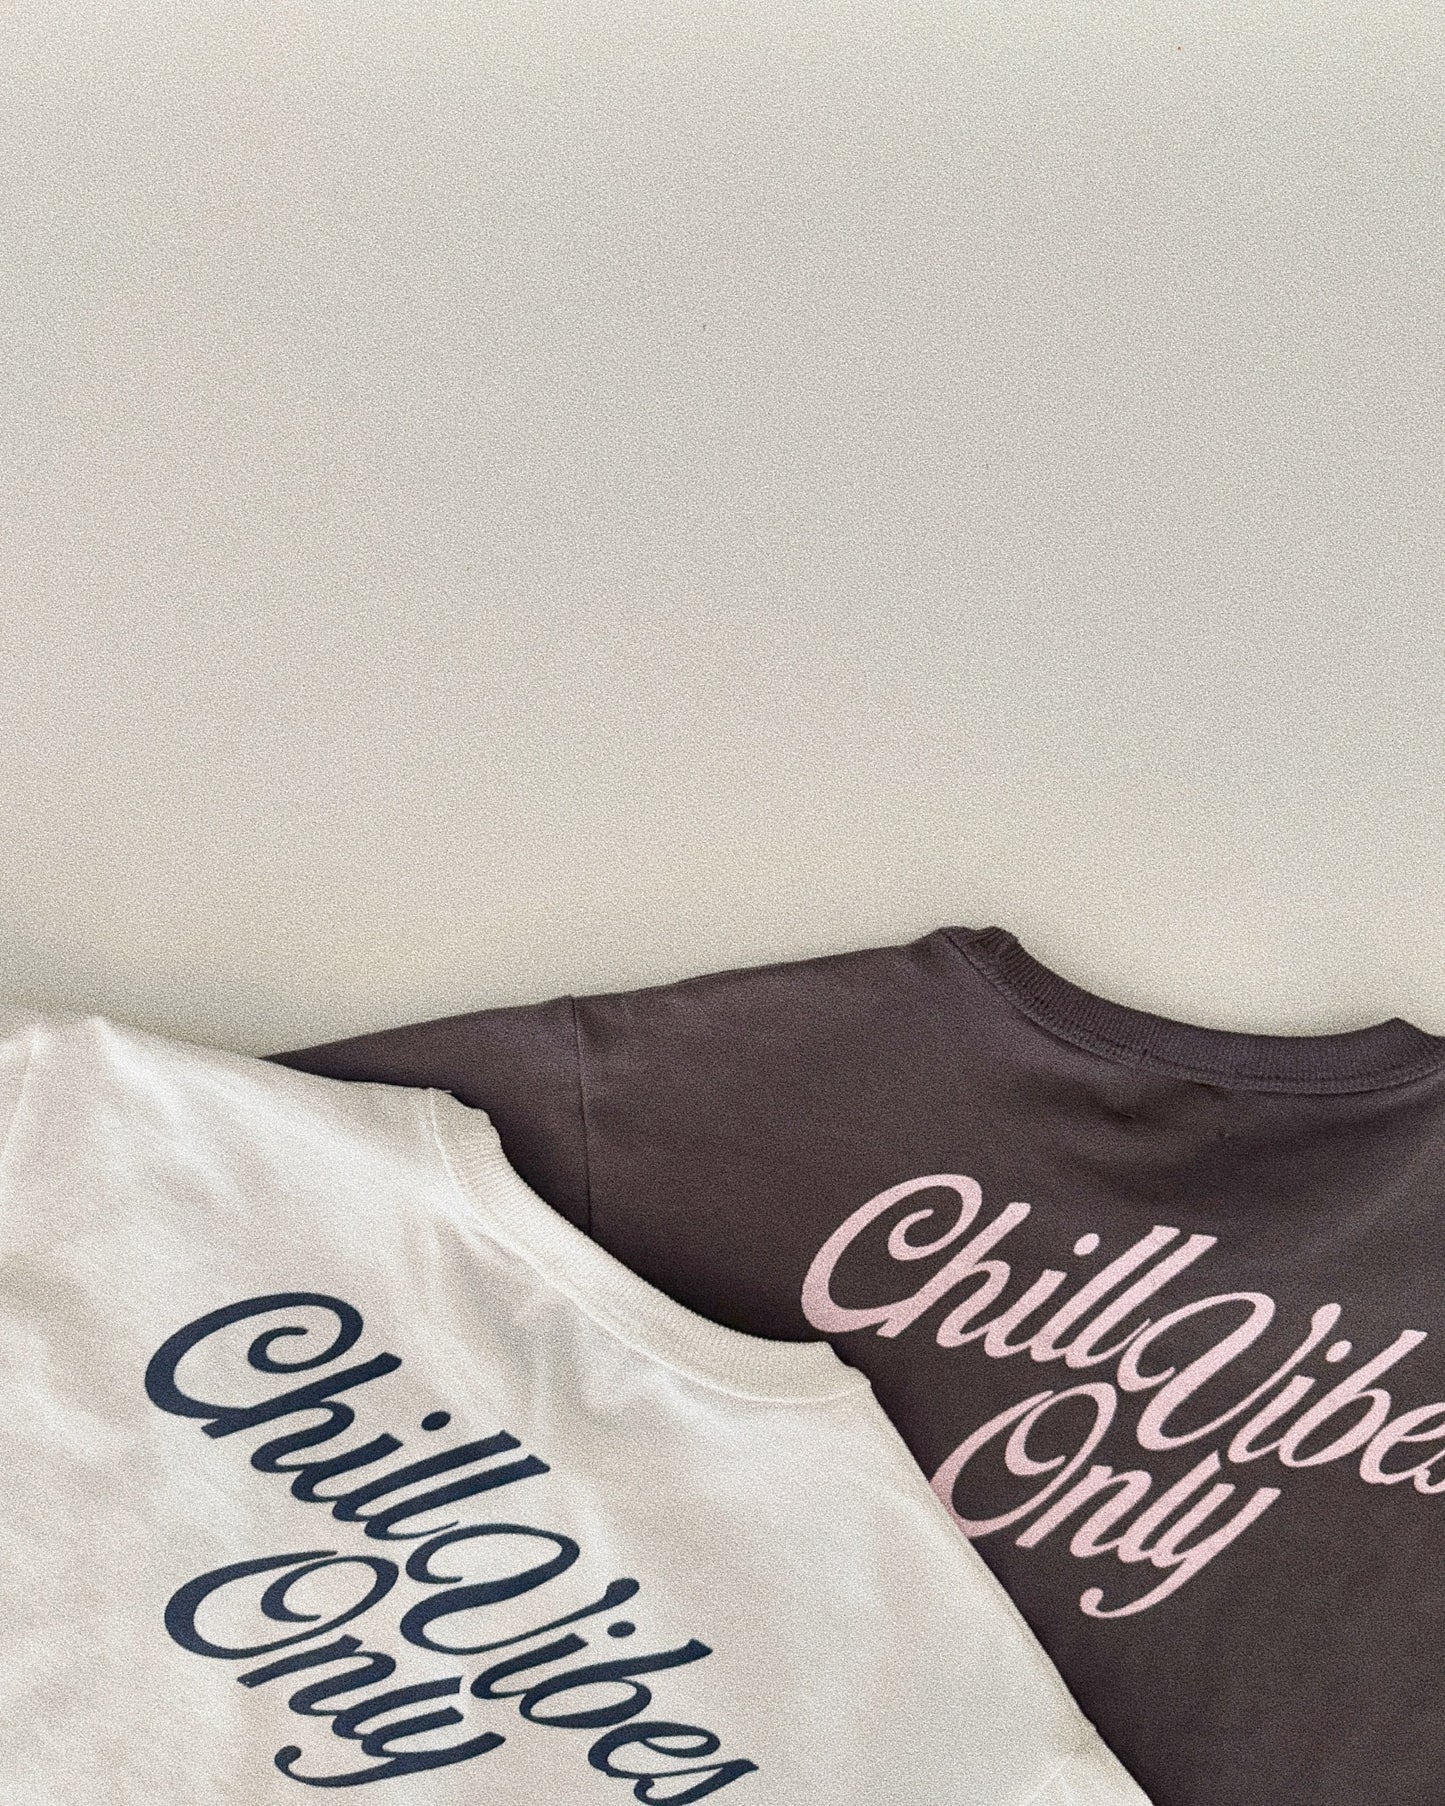 Chill Vibes Tee